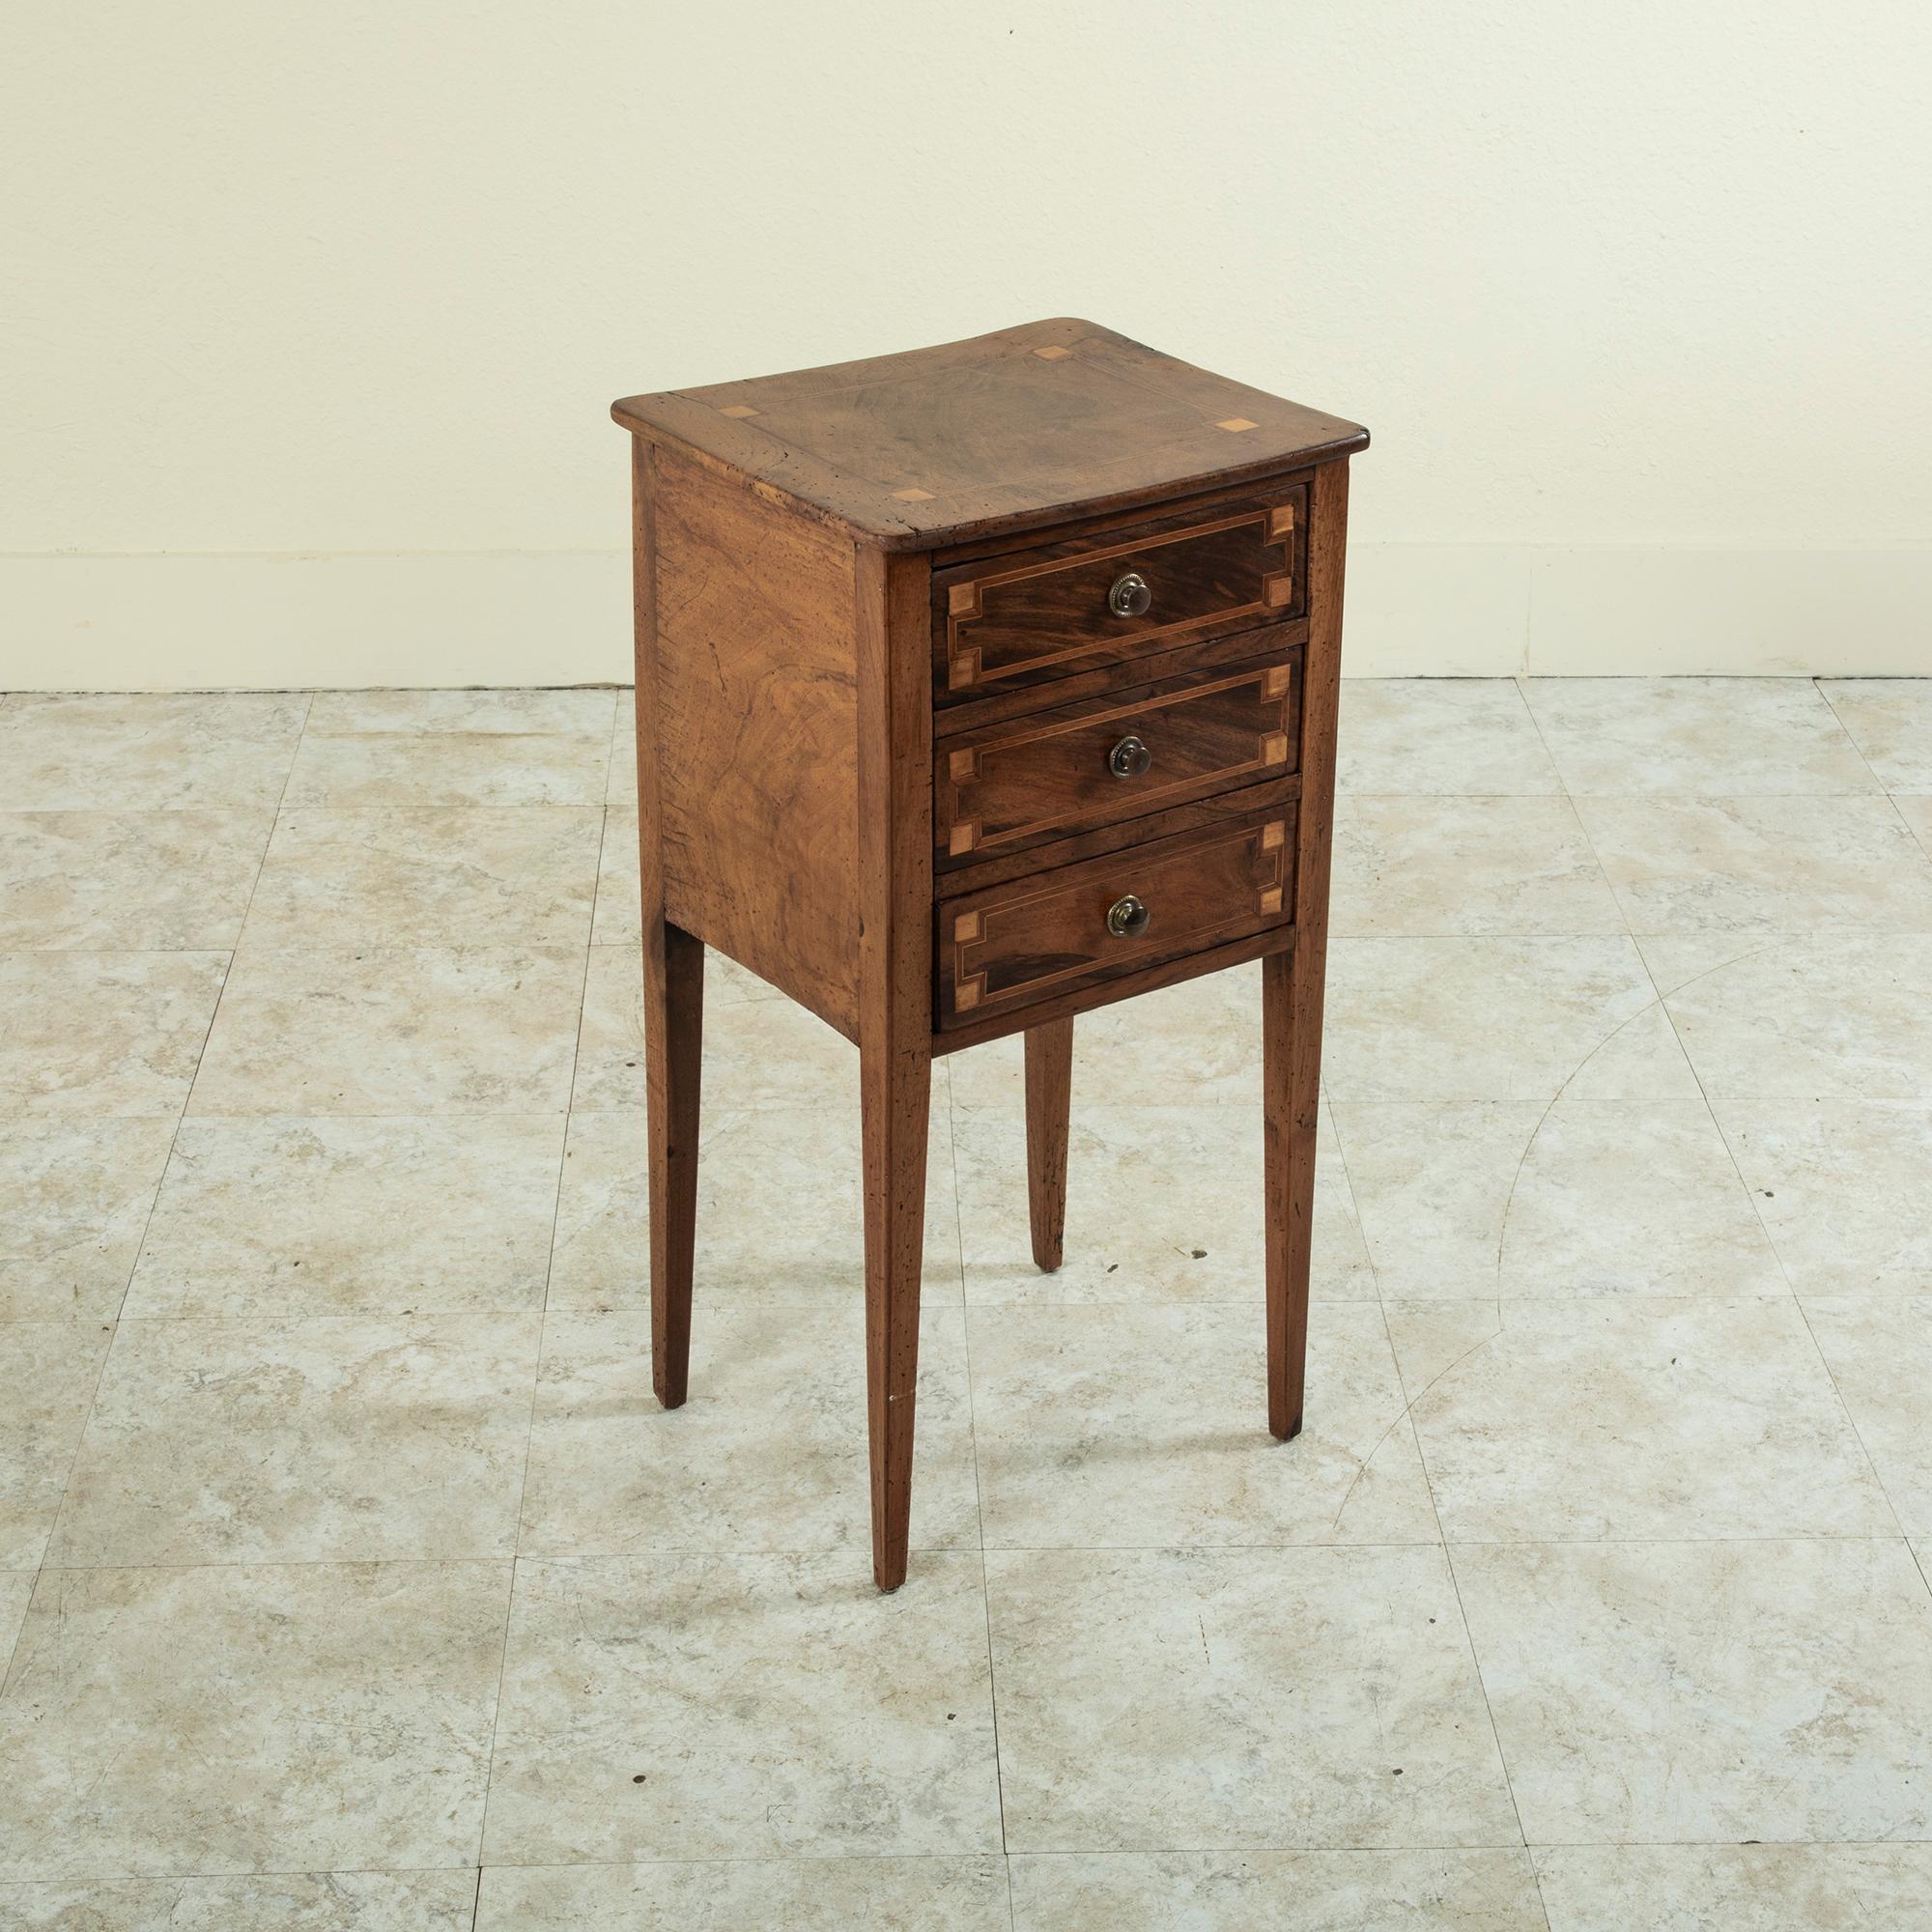 Inlay Late 18th Century French Louis XVI Period Cherrywood Nightstand or Side Table